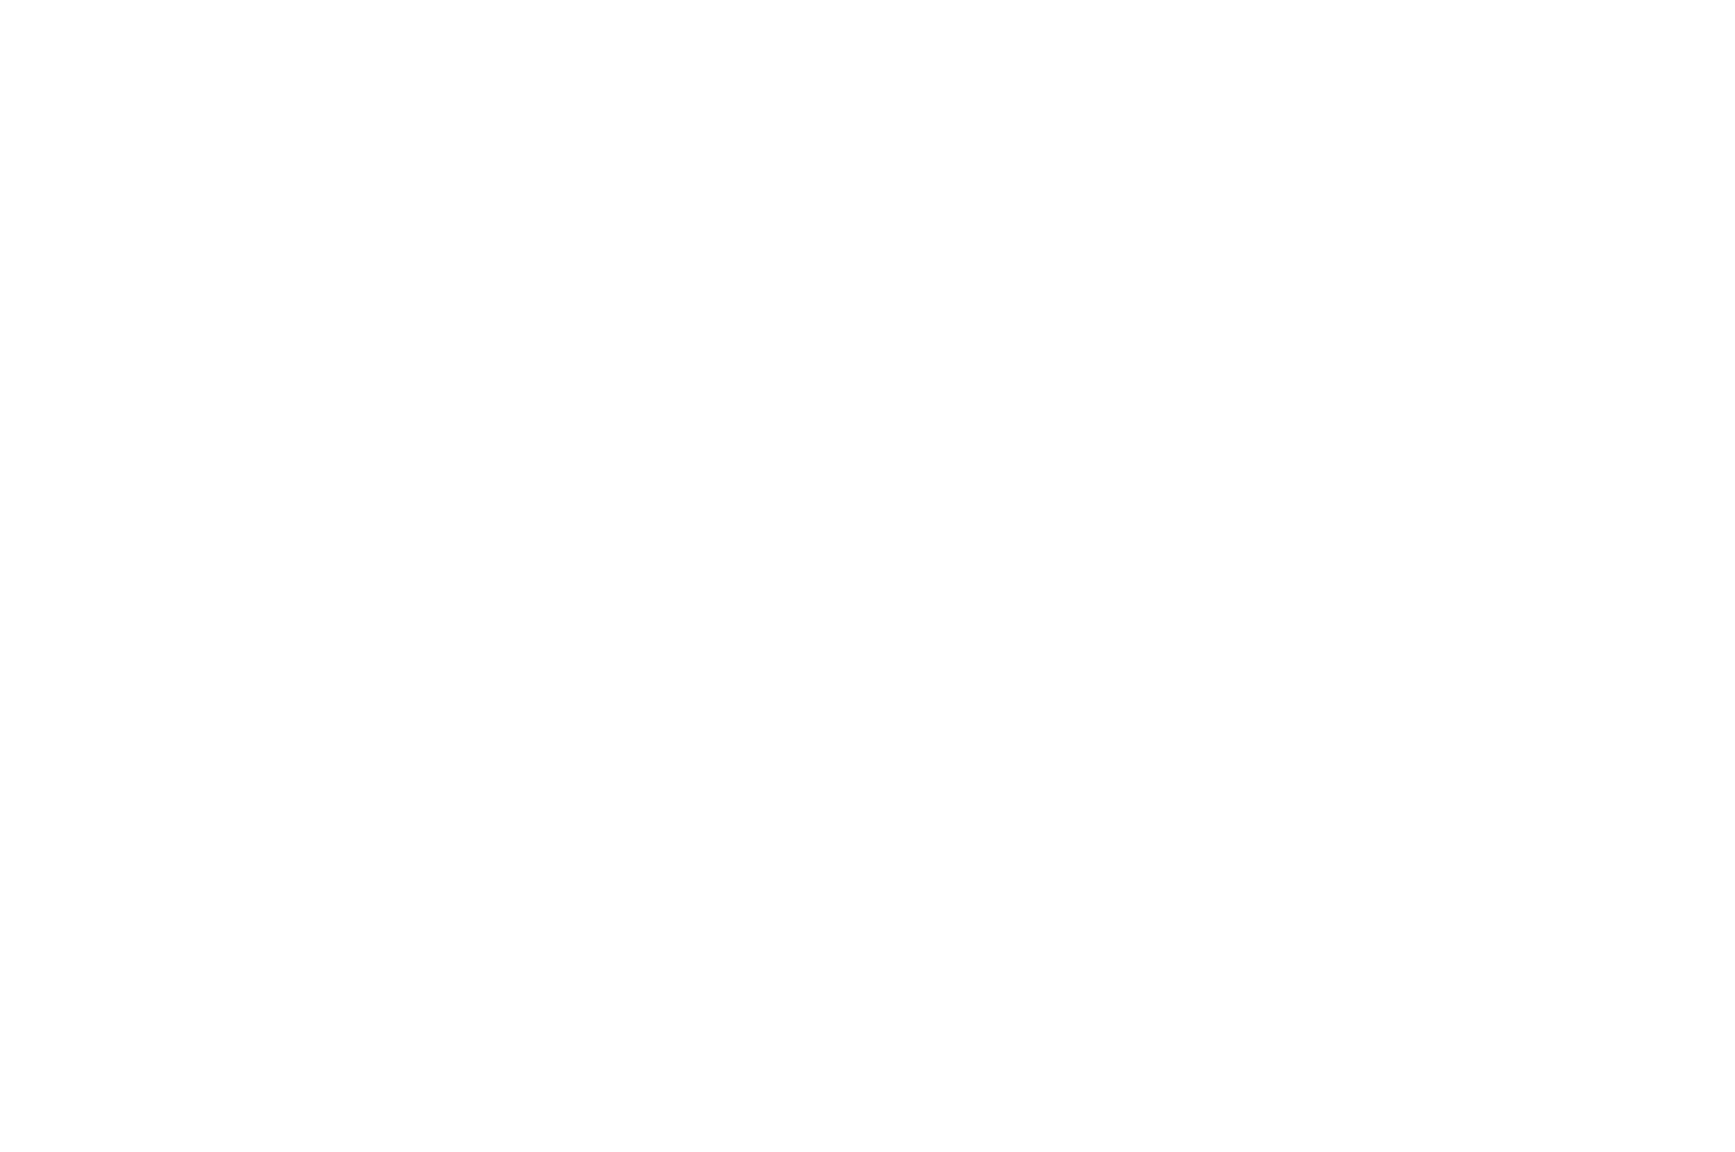 NOMINATED  - BEST SUPPORTING ACTRESS  - THE SHORT FILM AWARDS 2016 (1).png